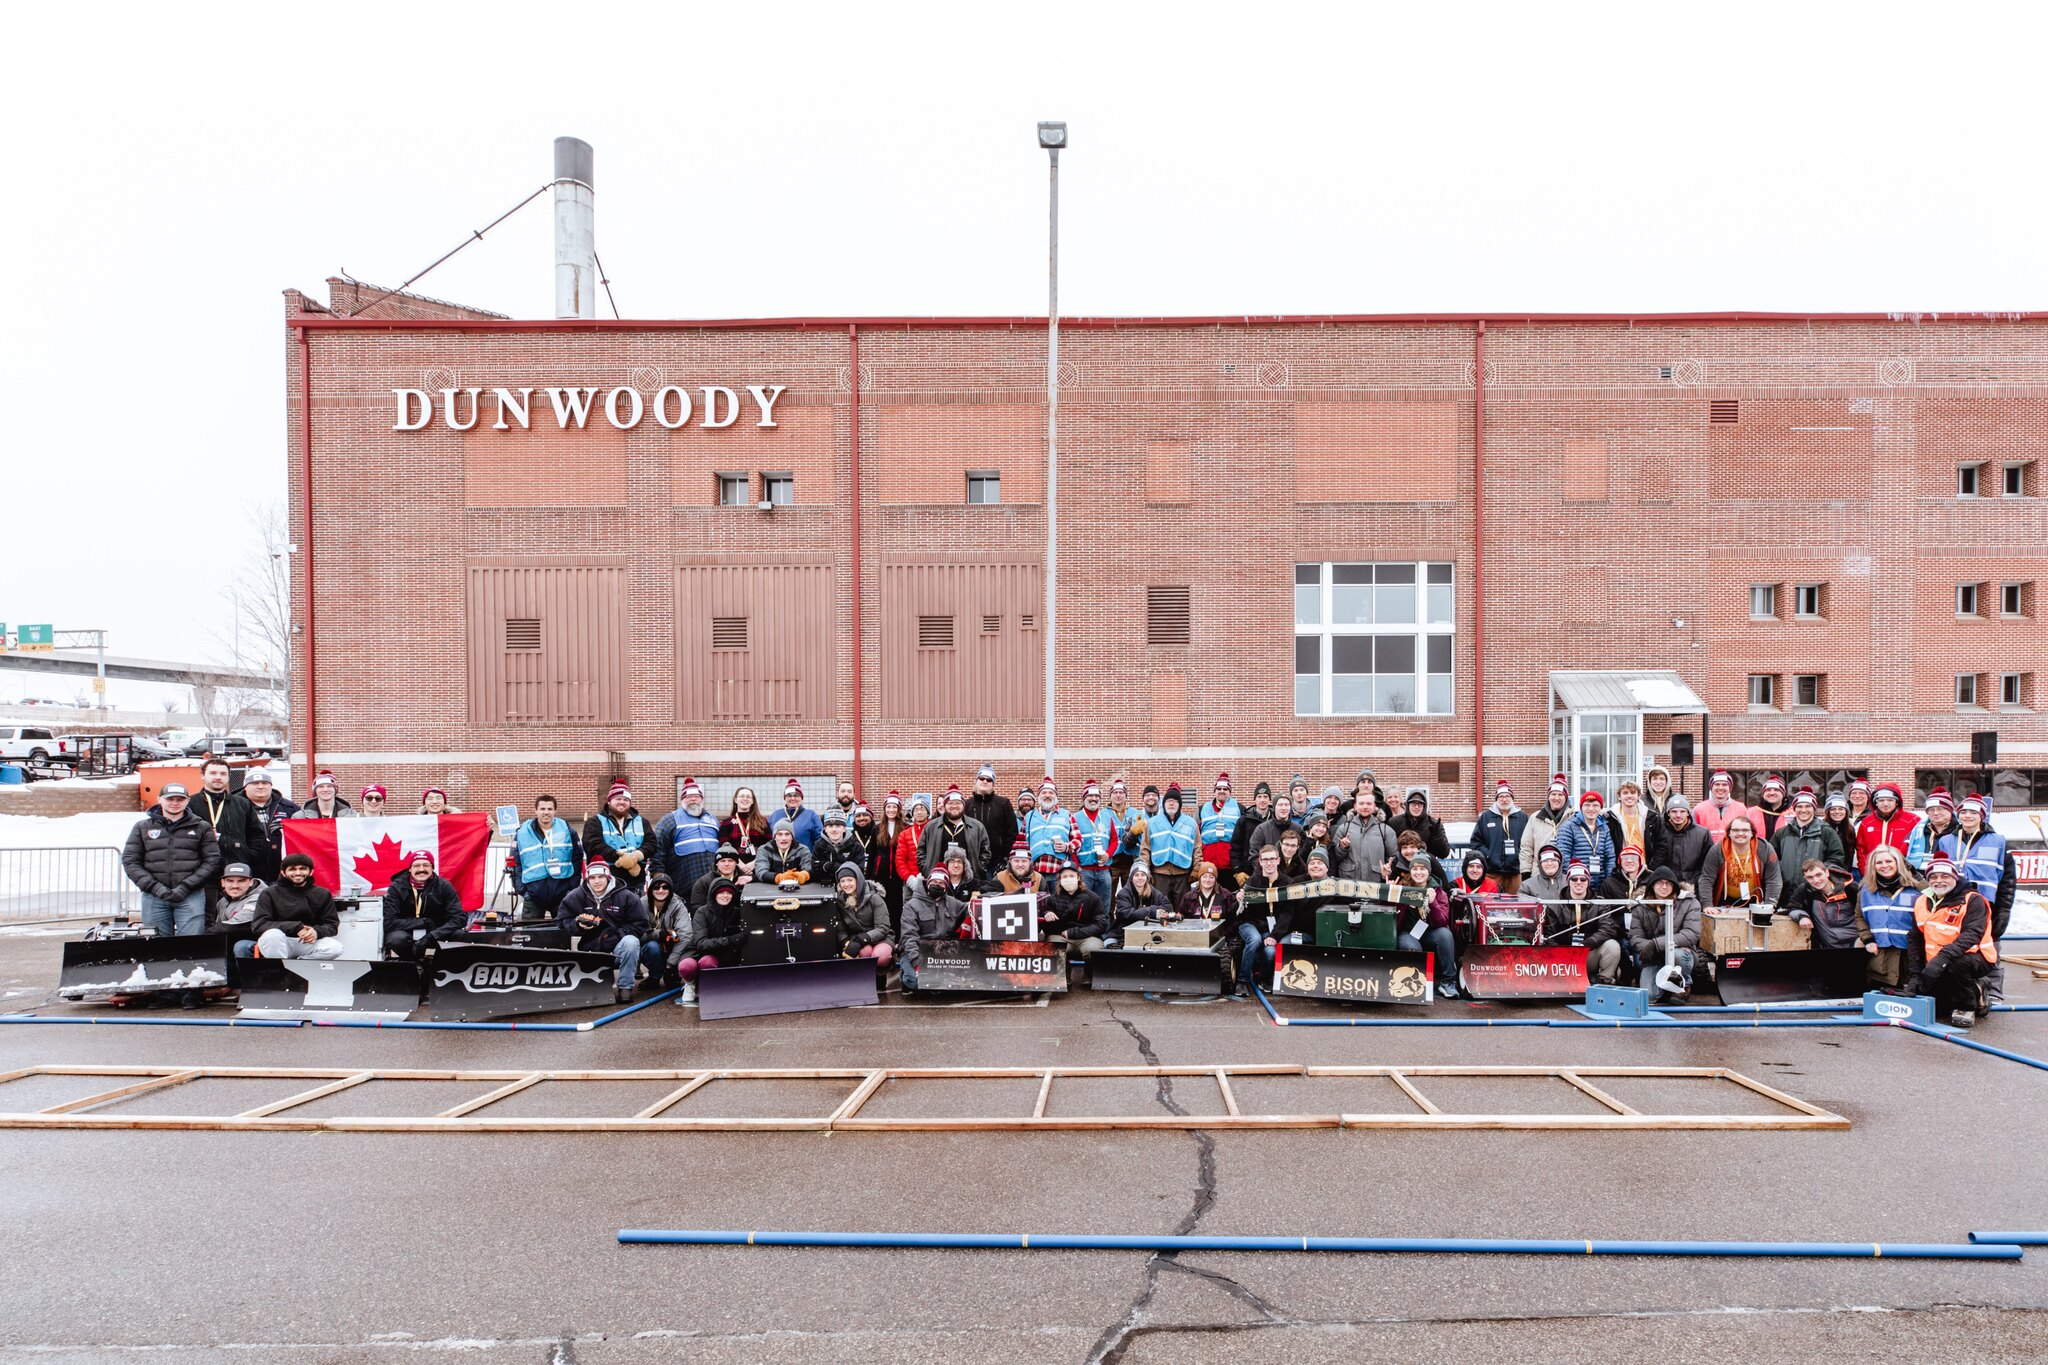 Snowplow contestants pose together in a group shot outside the Dunwoods college building.